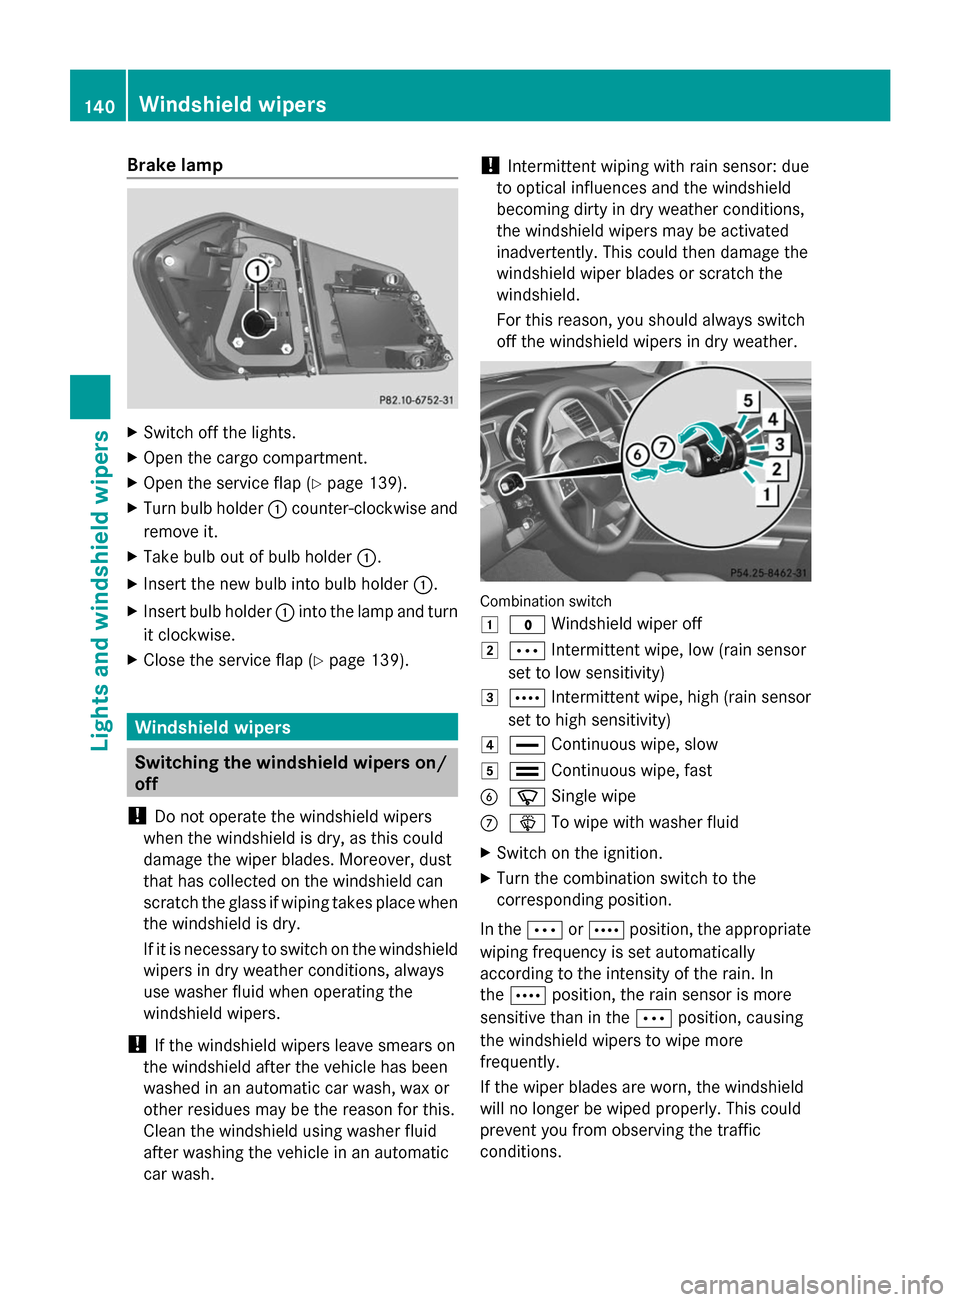 MERCEDES-BENZ GL-Class 2014 X166 Service Manual Brake lamp
X
Switch off the lights.
X Open the cargo compartment.
X Open the service flap (Y page 139).
X Turn bulb holder :counter-clockwise and
remove it.
X Take bulb out of bulb holder :.
X Insert 